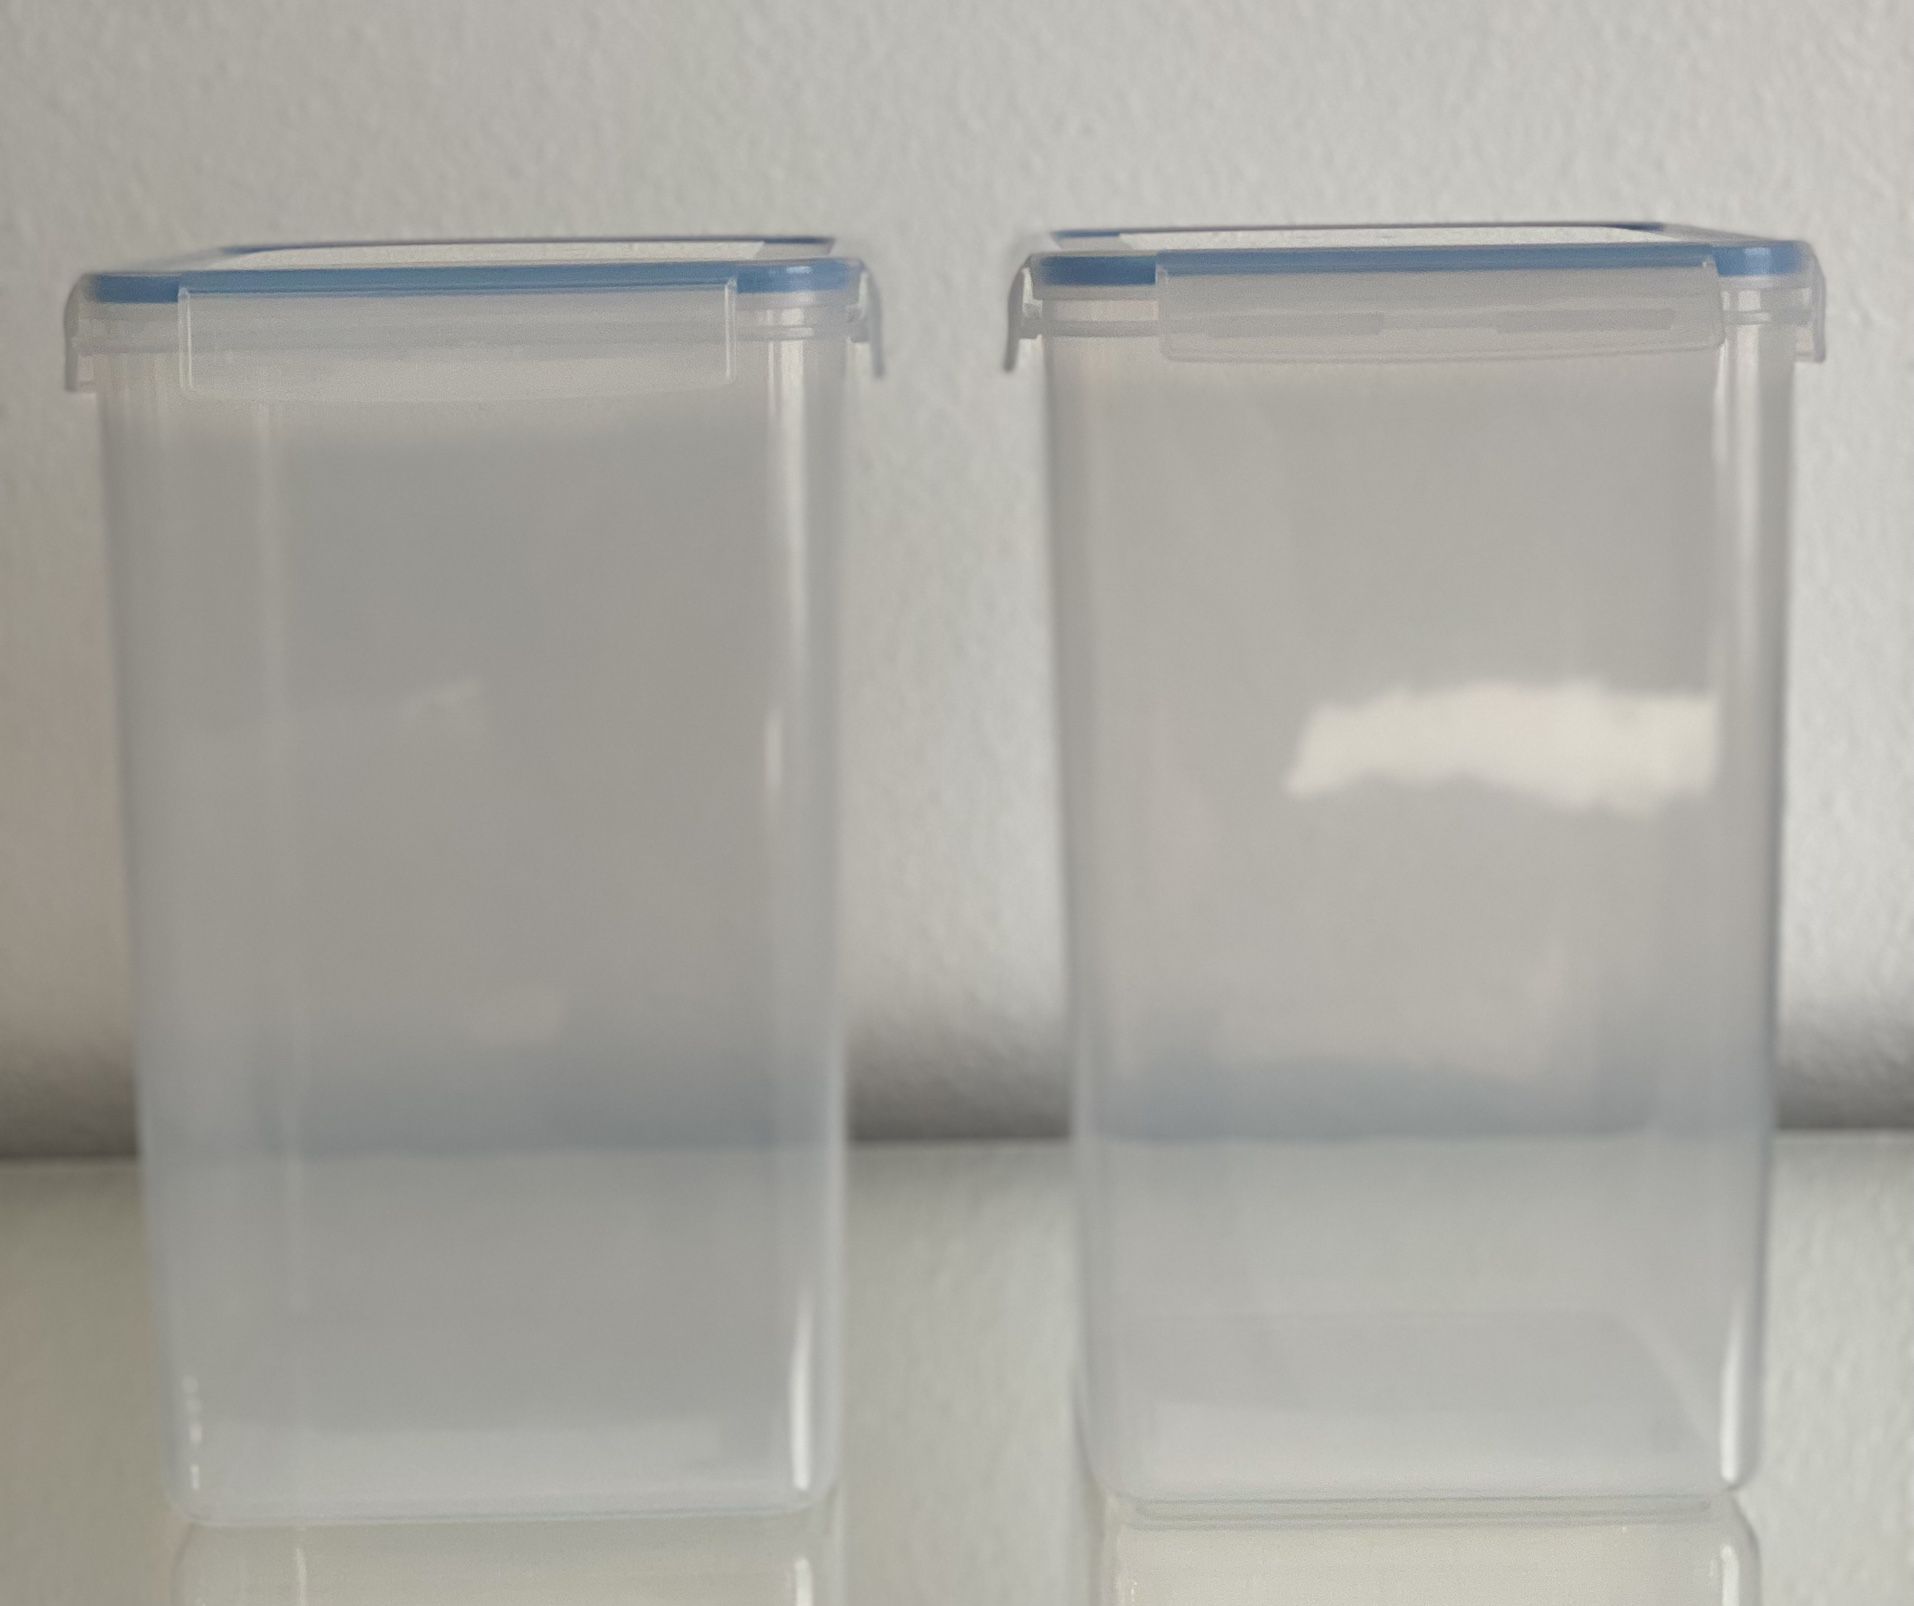 2 STORAGE CONTAINERS WITH LIDS